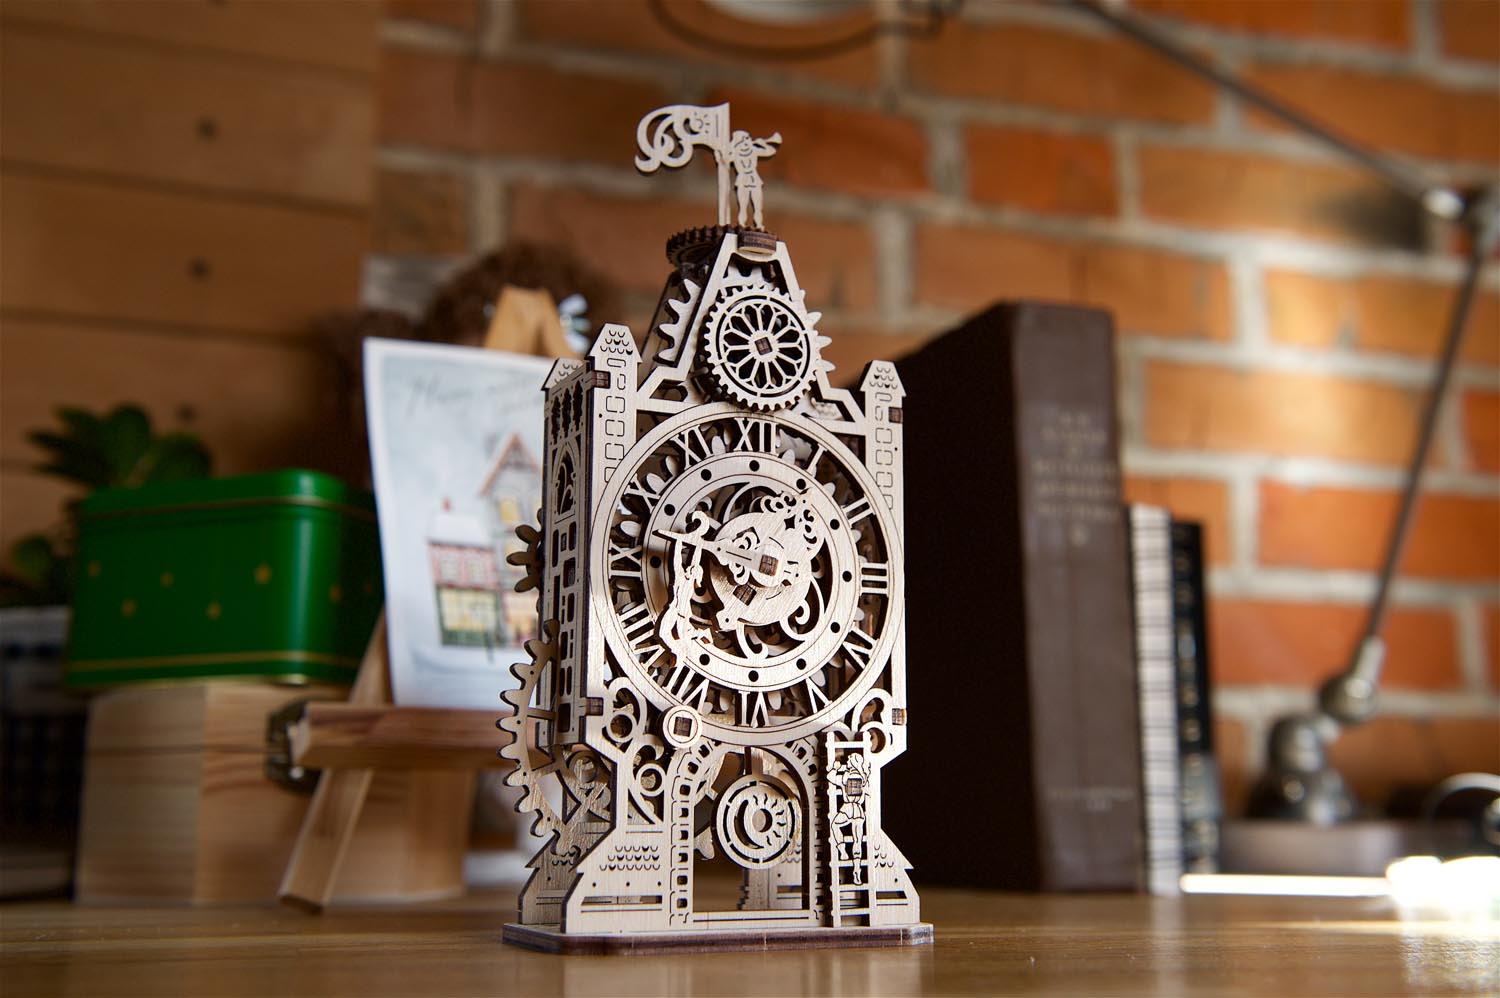 Presenting New Model - Old Tower Clock!